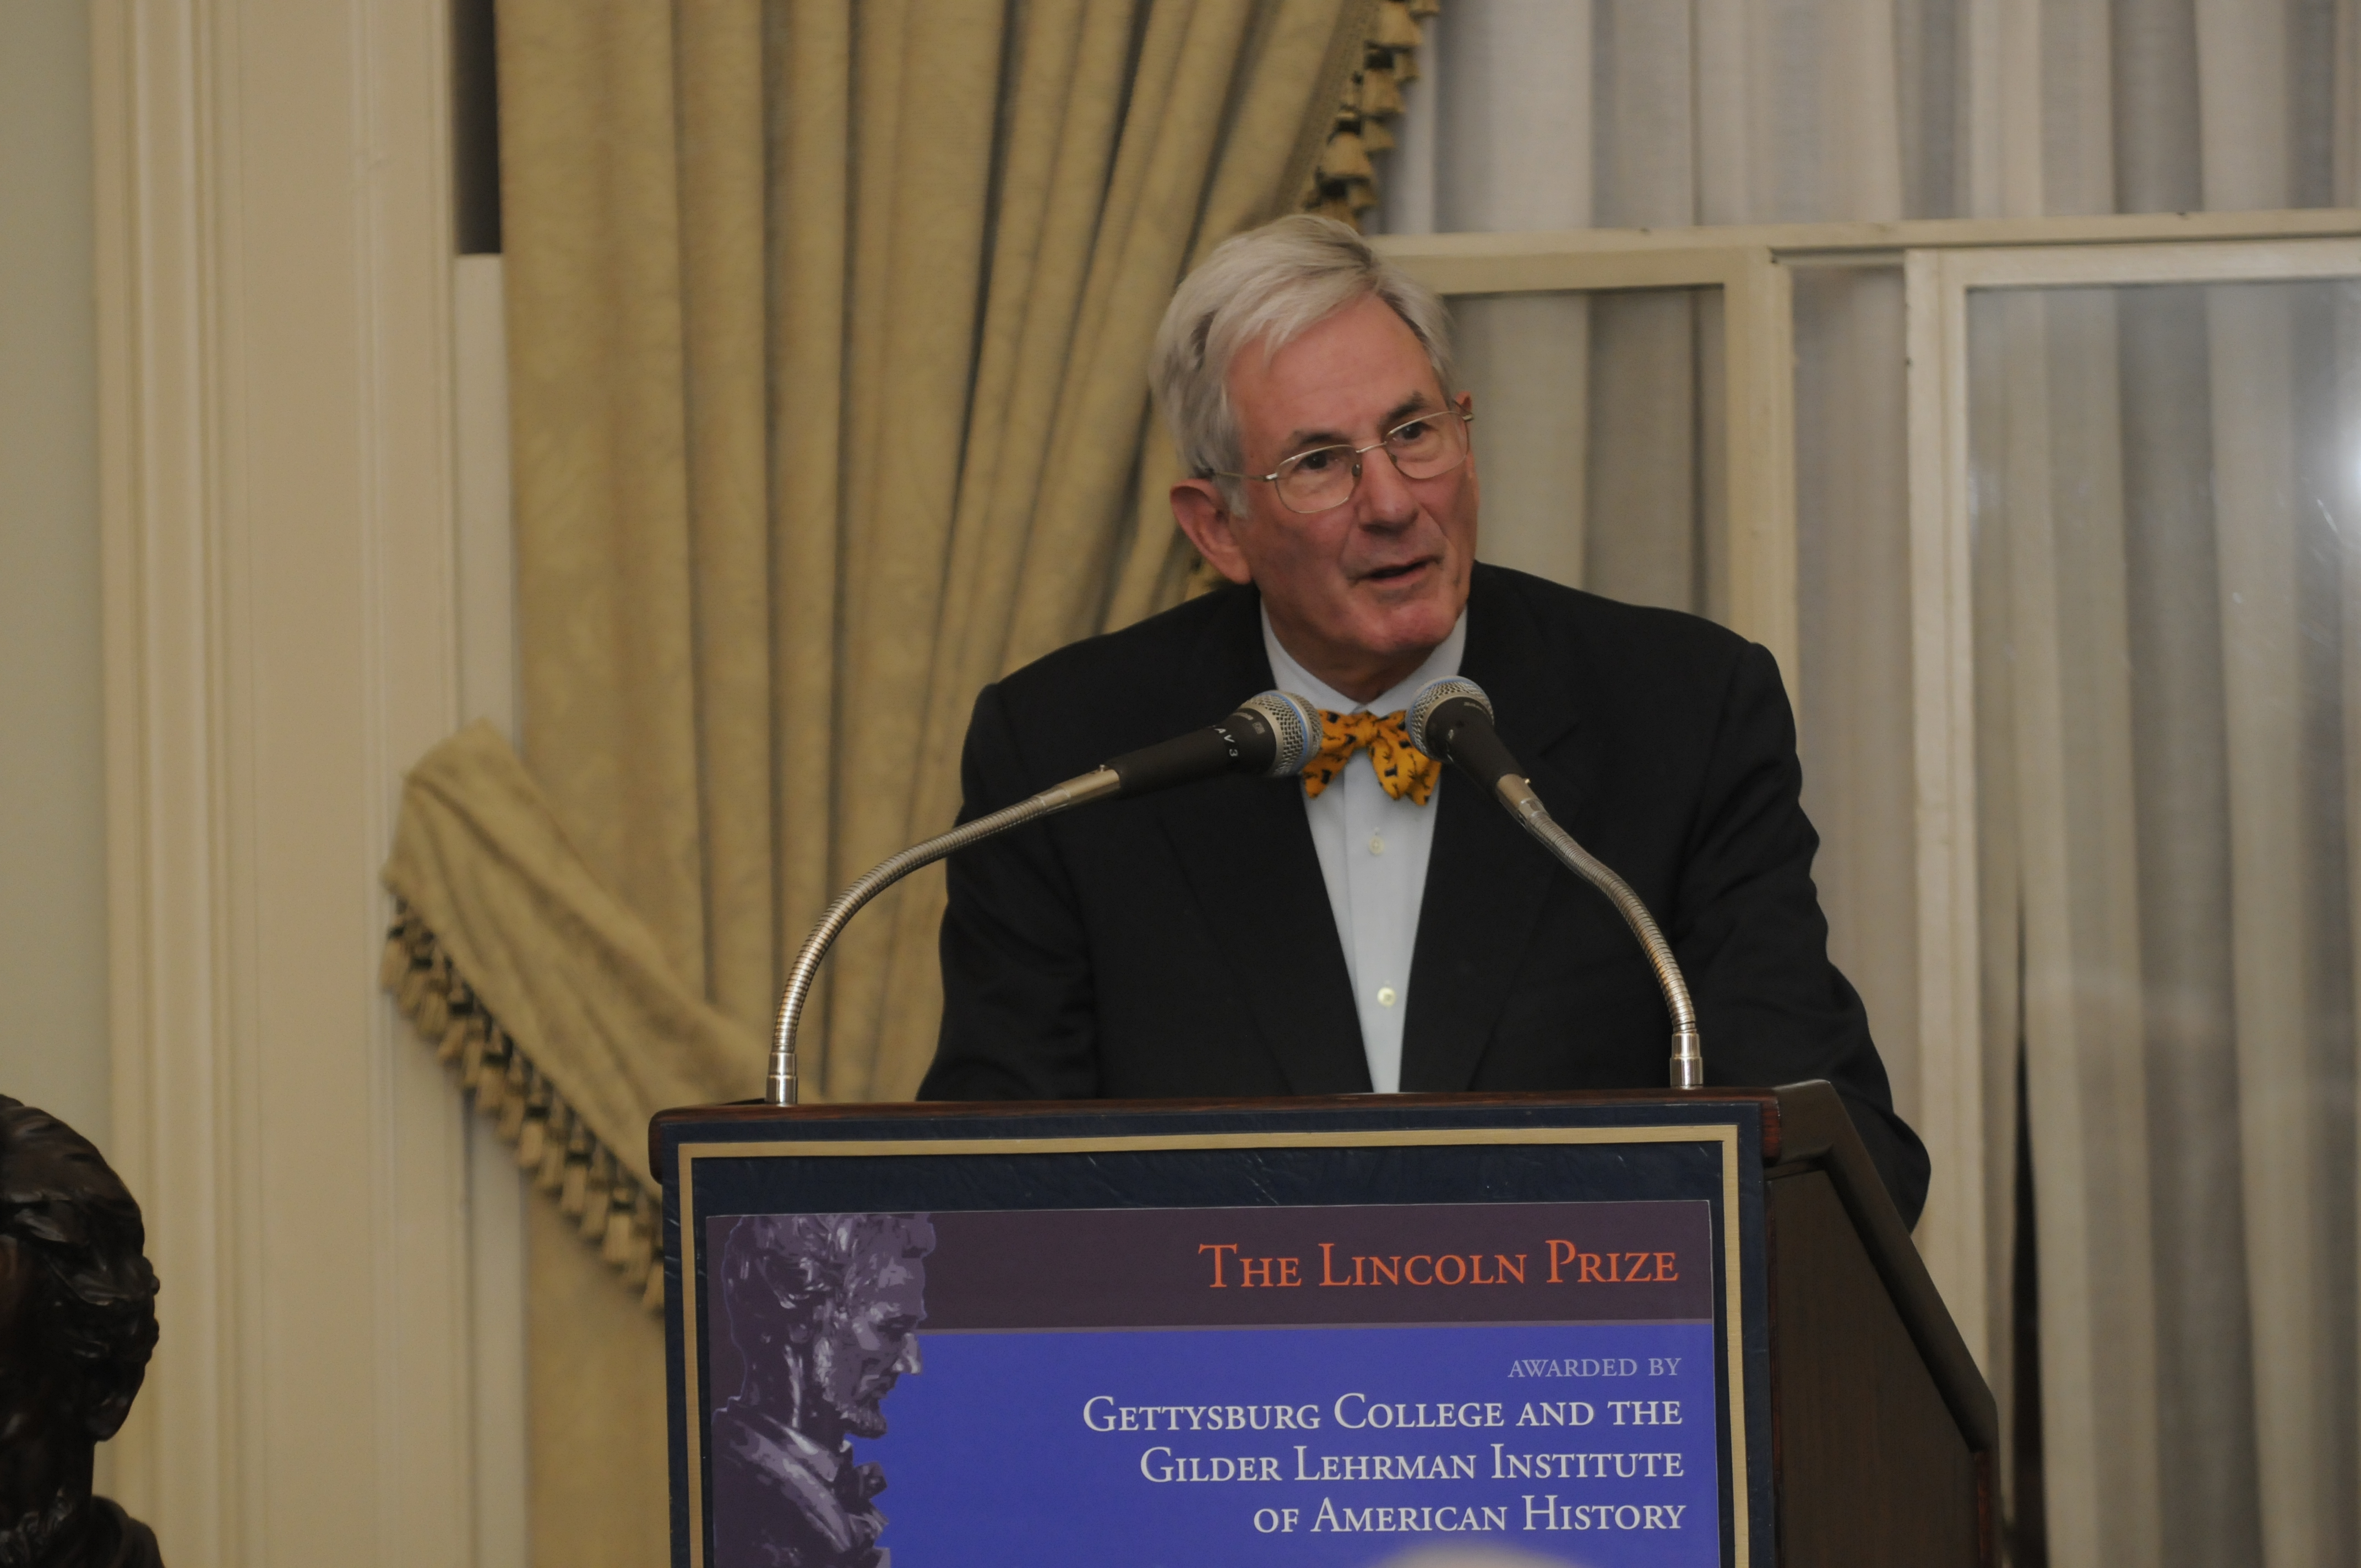 Richard Gilder speaking at the Lincoln Prize Ceremony in 2012